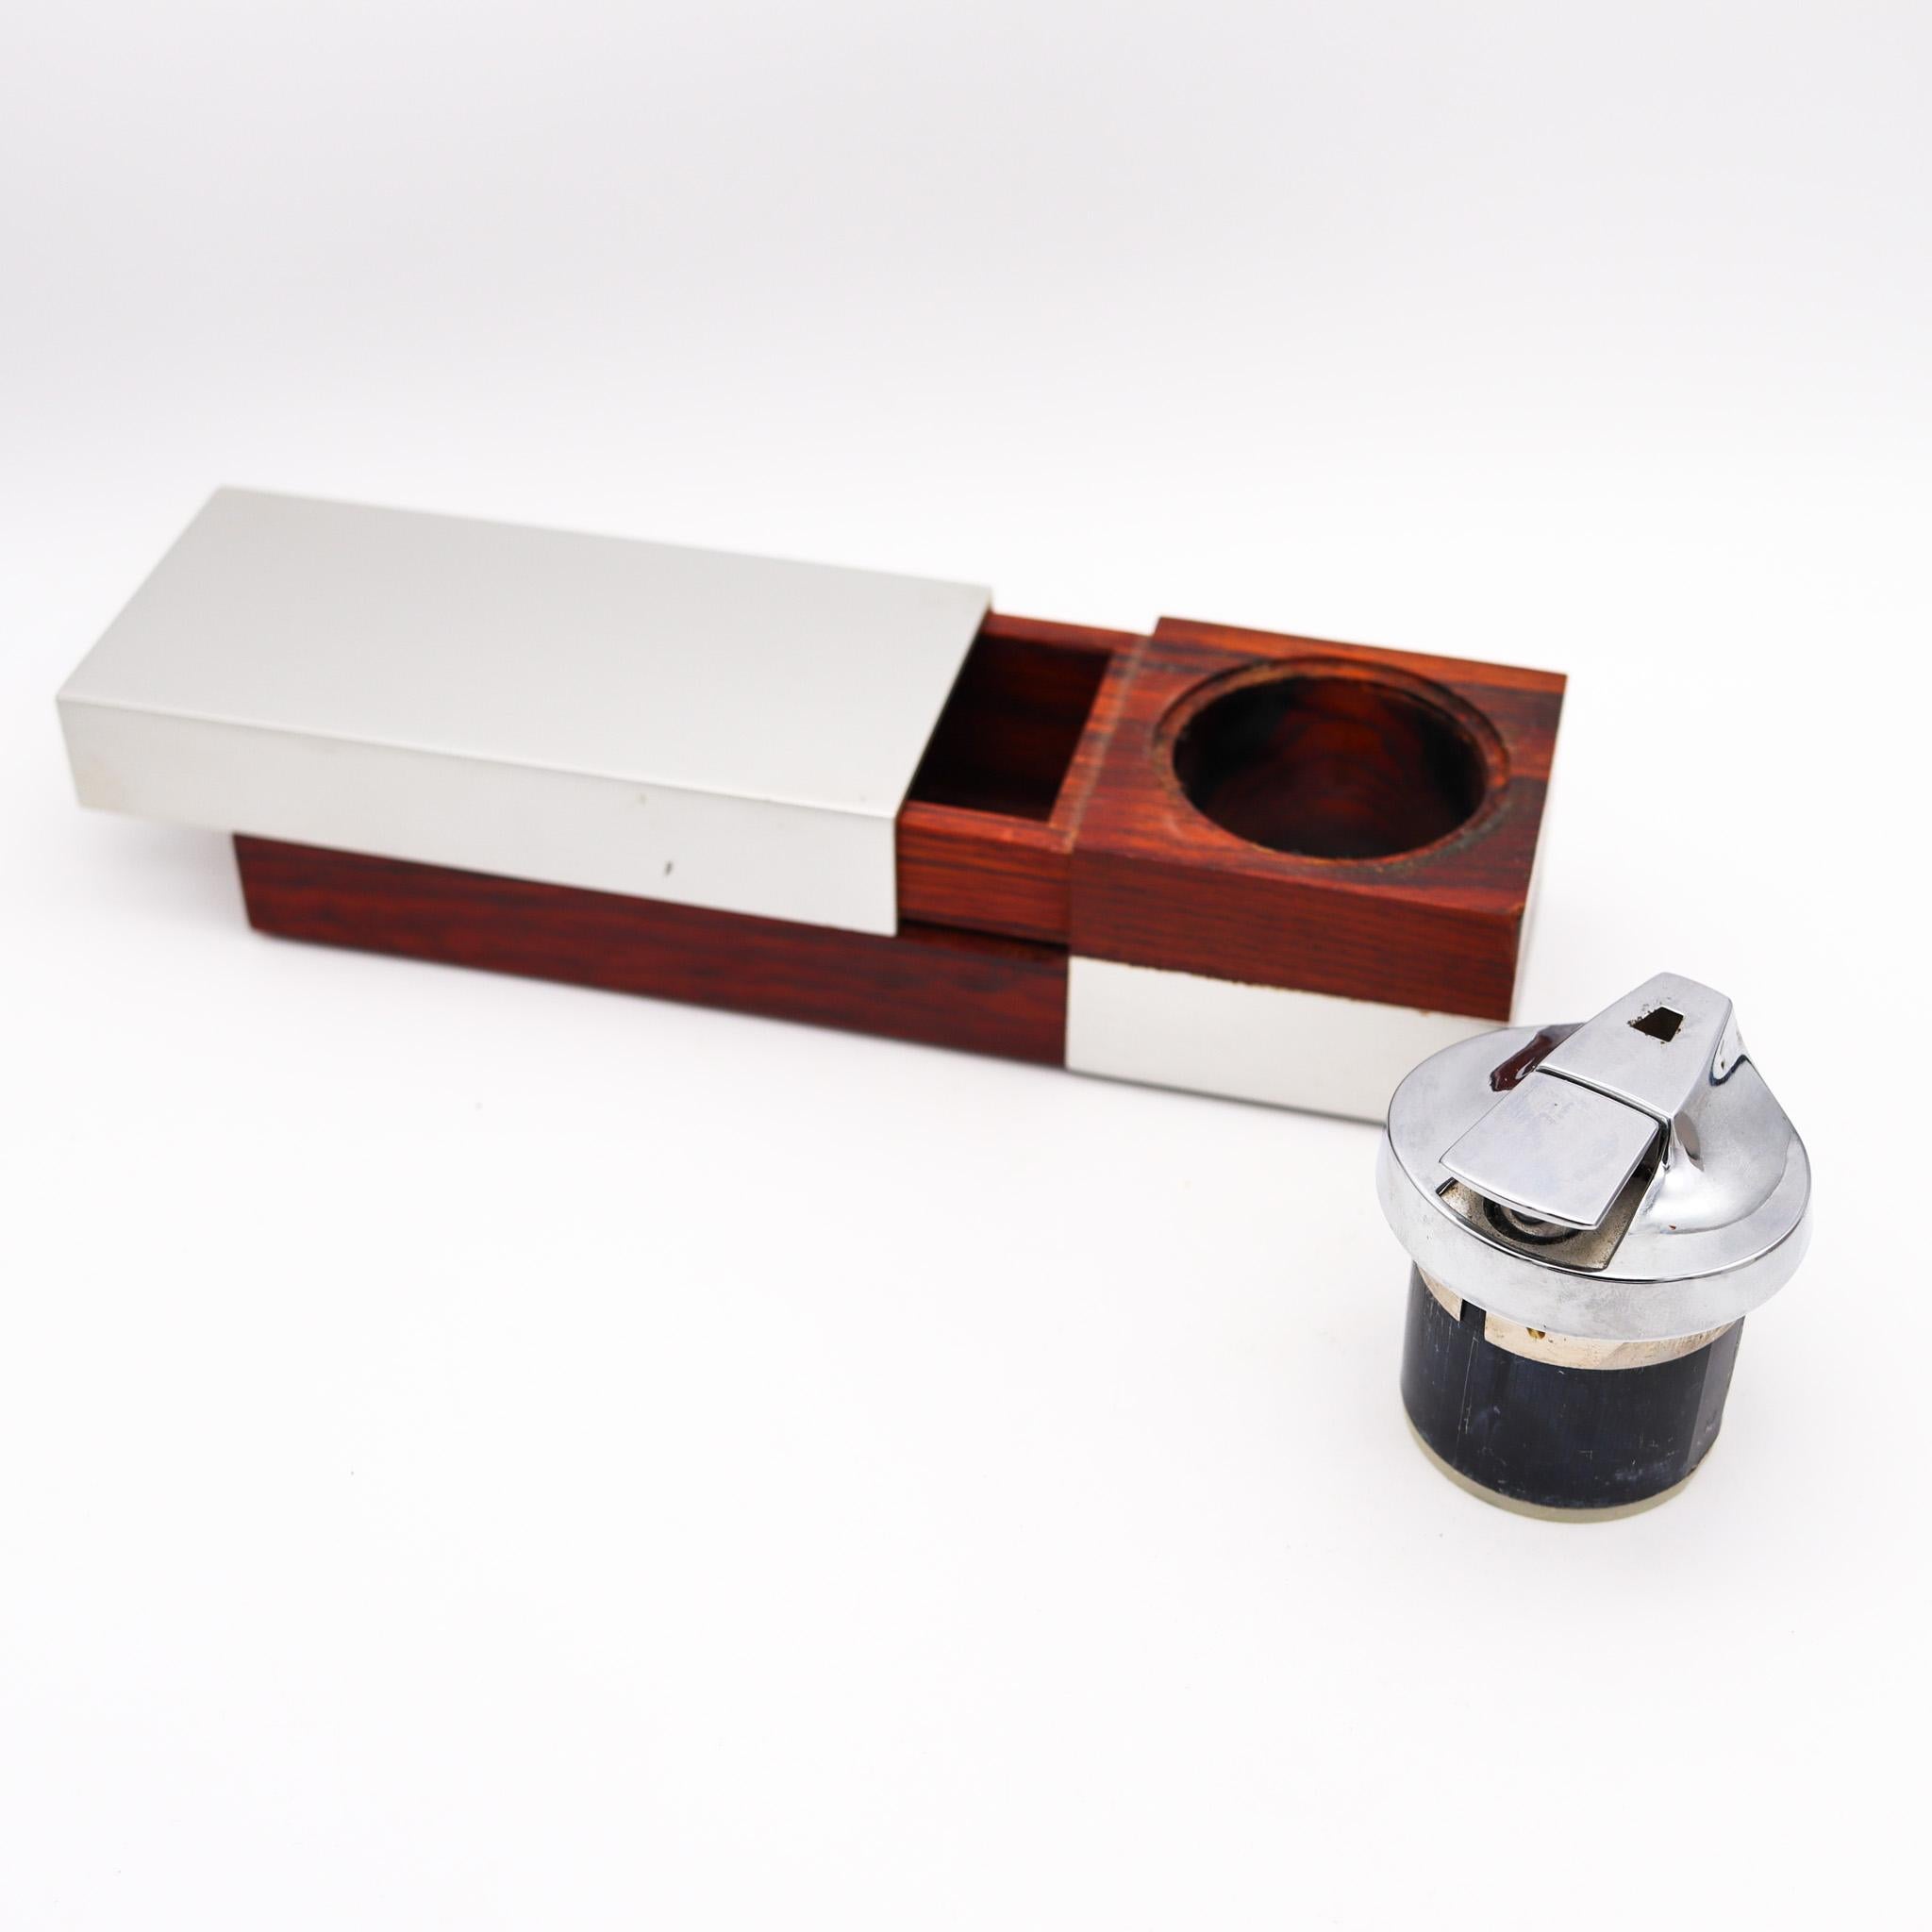 RONSON 1960 Germany Varaflame Scandia Lighter Box Cedar & Brushed Aluminum In Excellent Condition For Sale In Miami, FL